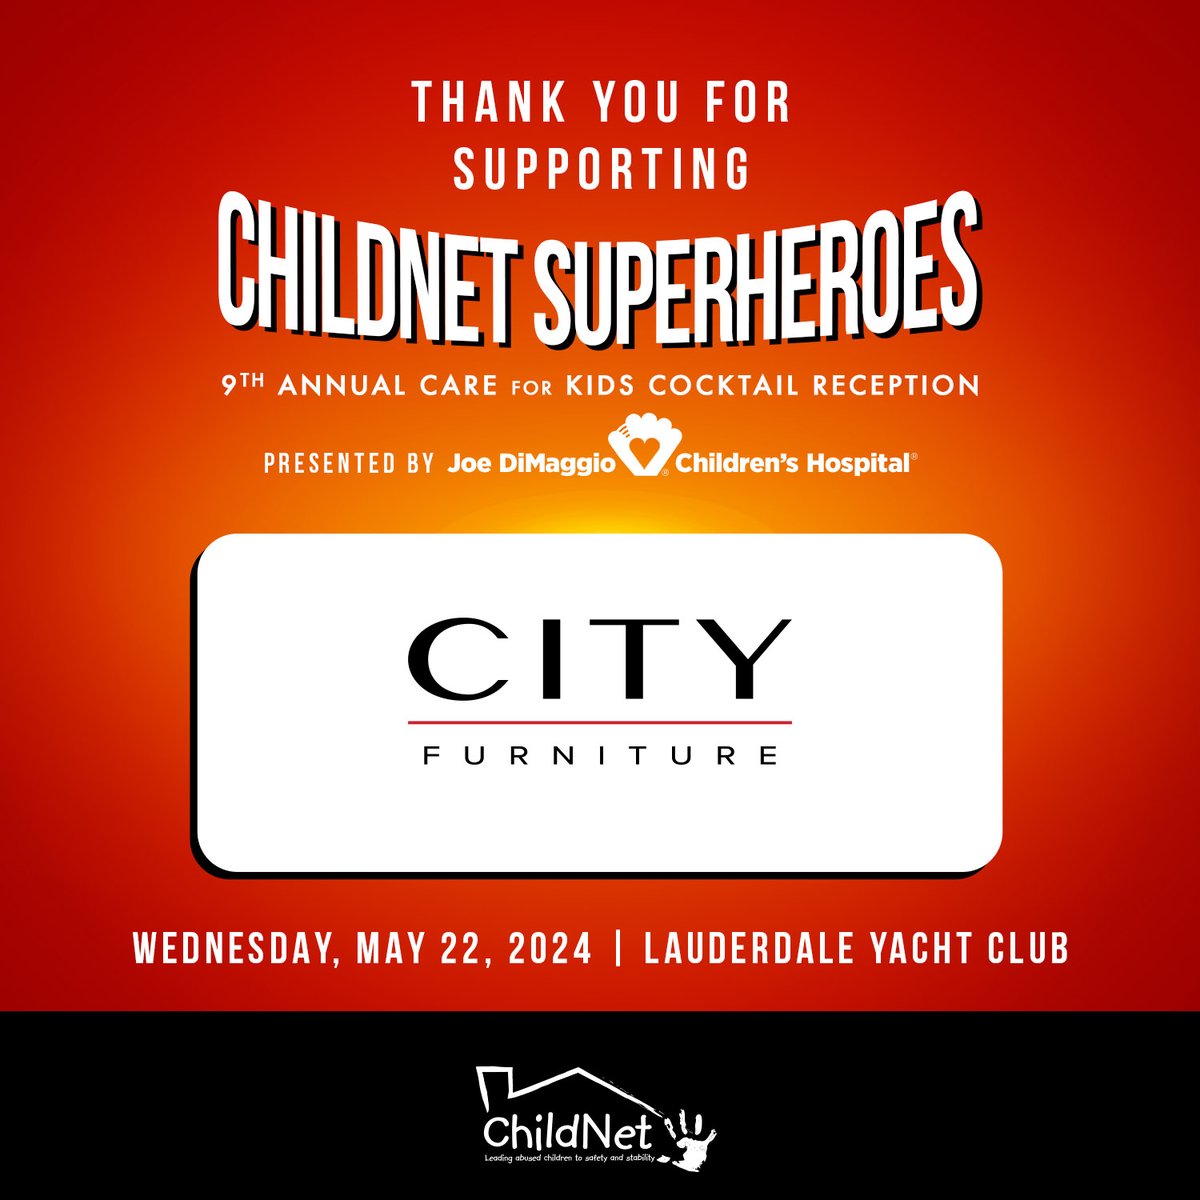 Thank you @CityFurniture for becoming a sponsor of the 9th Annual Care for Kids Cocktail Reception!